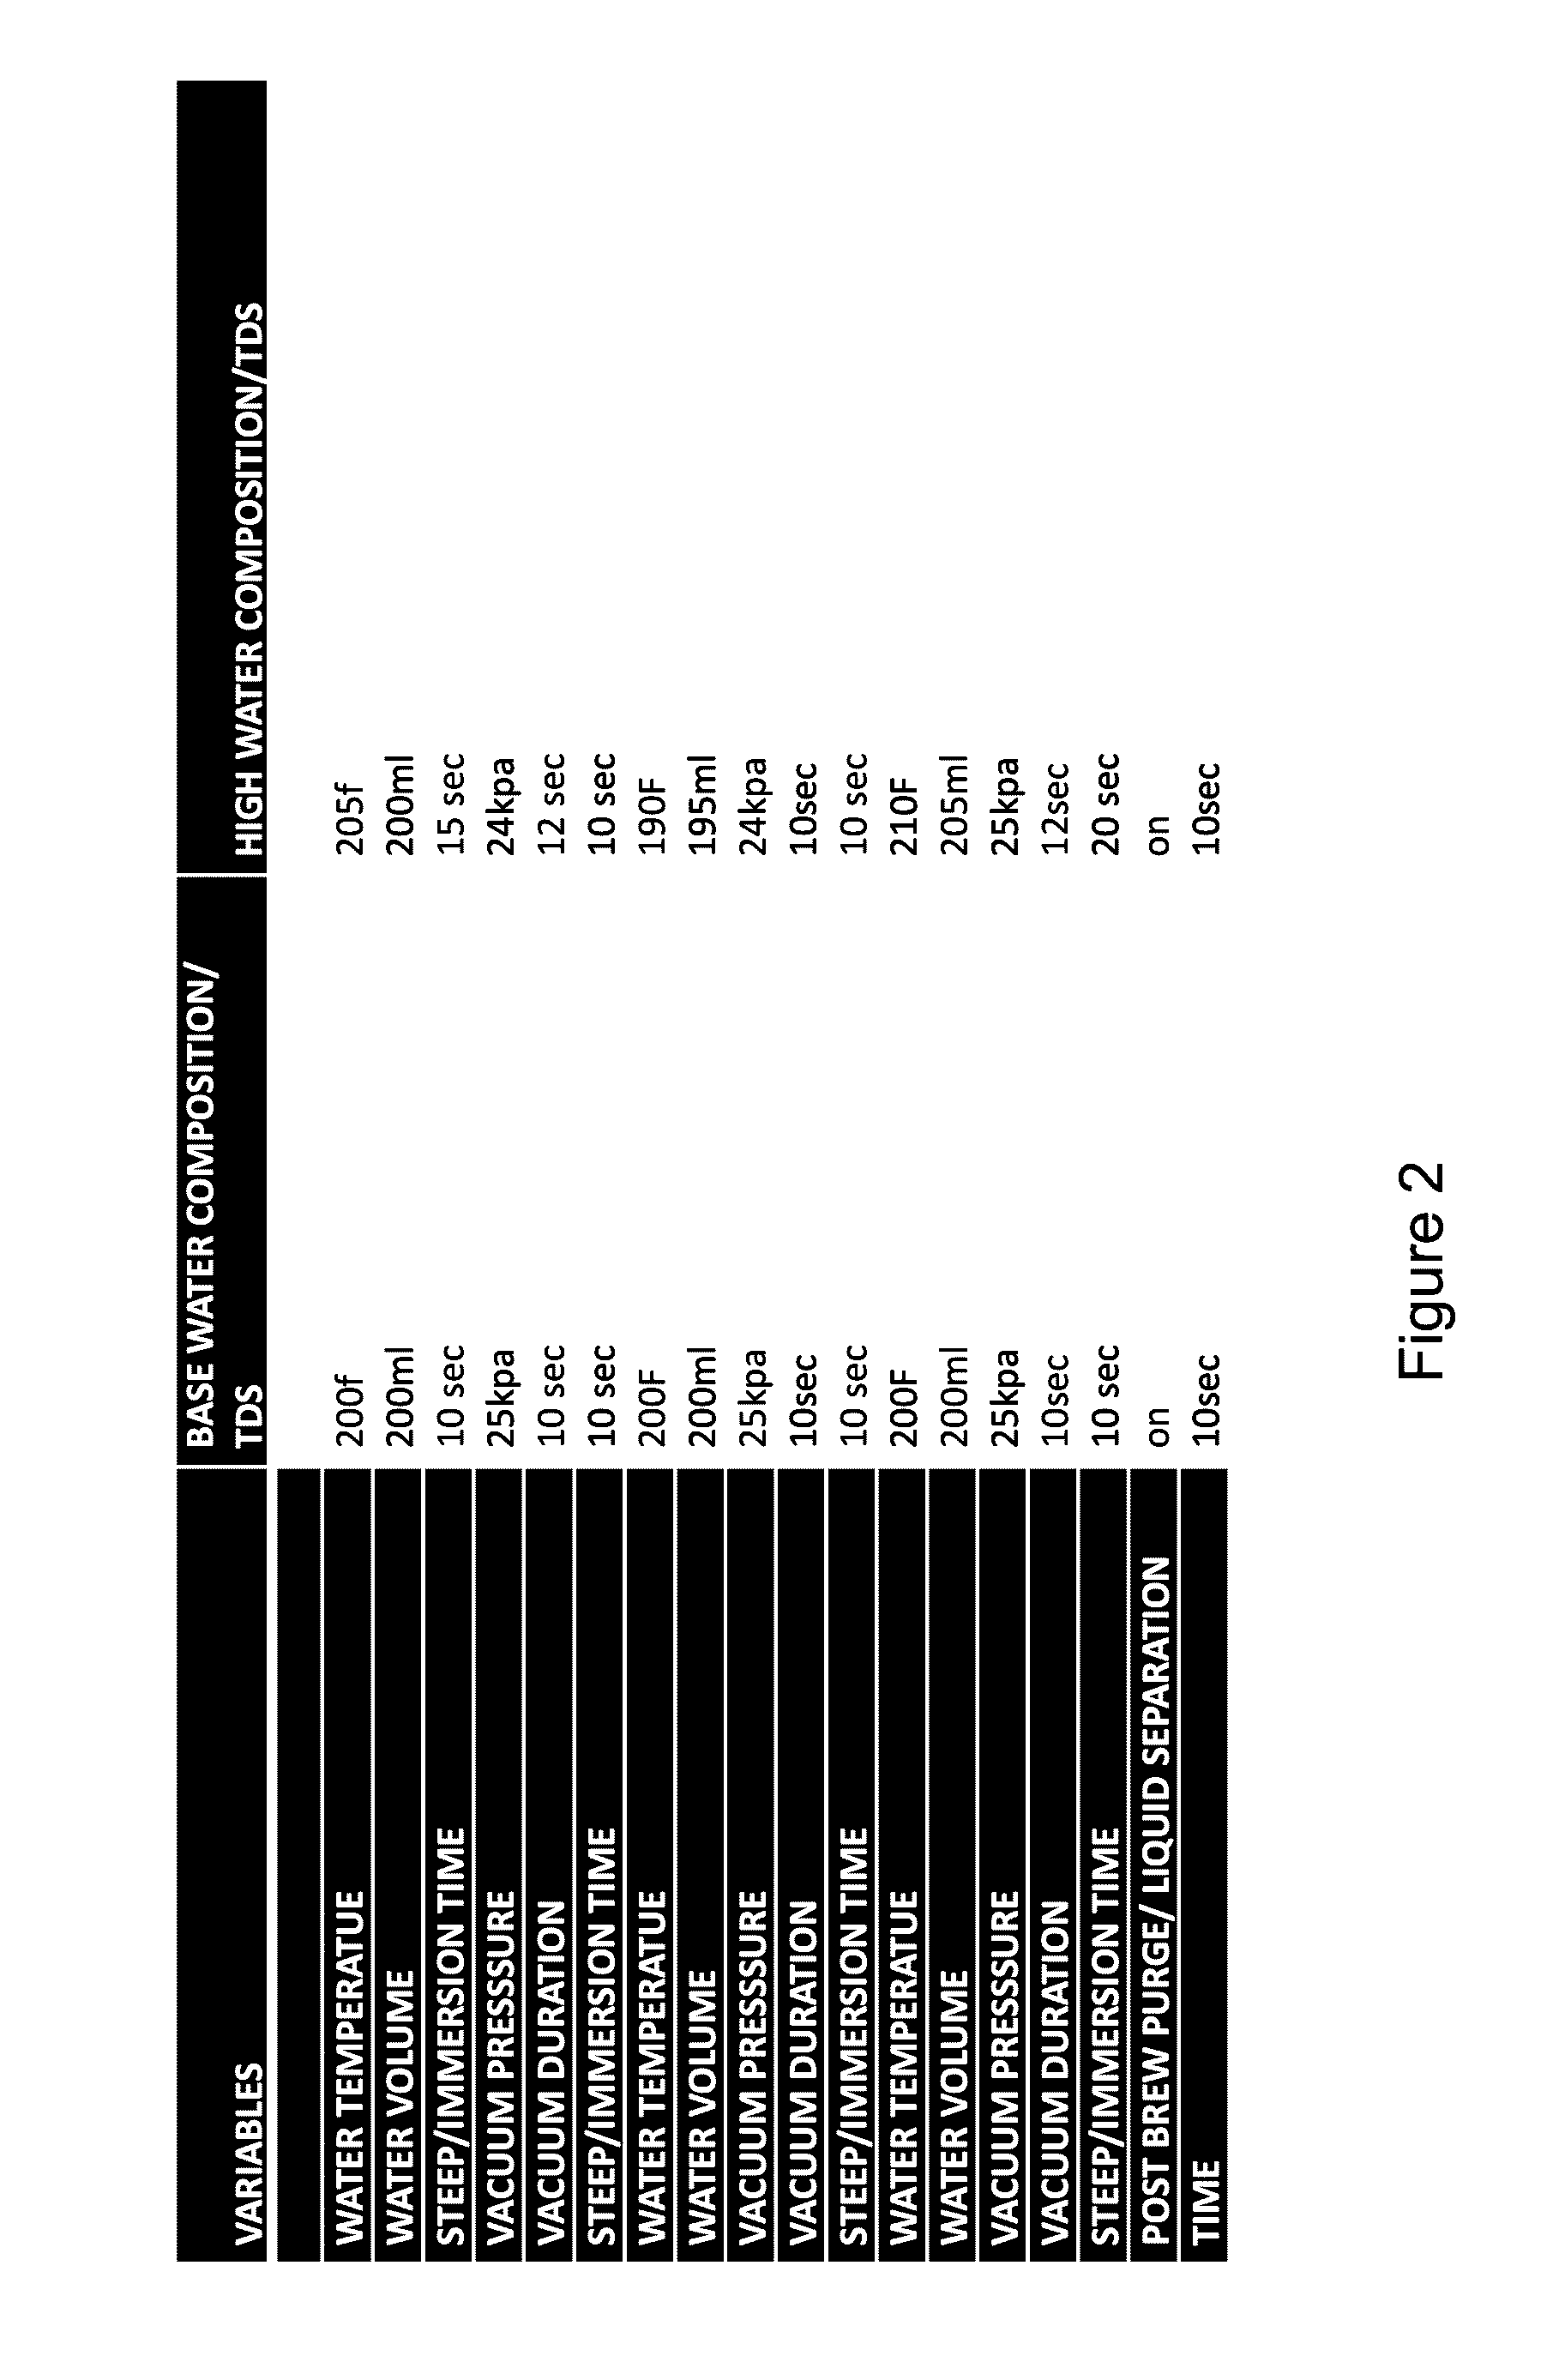 System and Method of Brewing Beverages Using Geo-Location Based Brewing Parameters